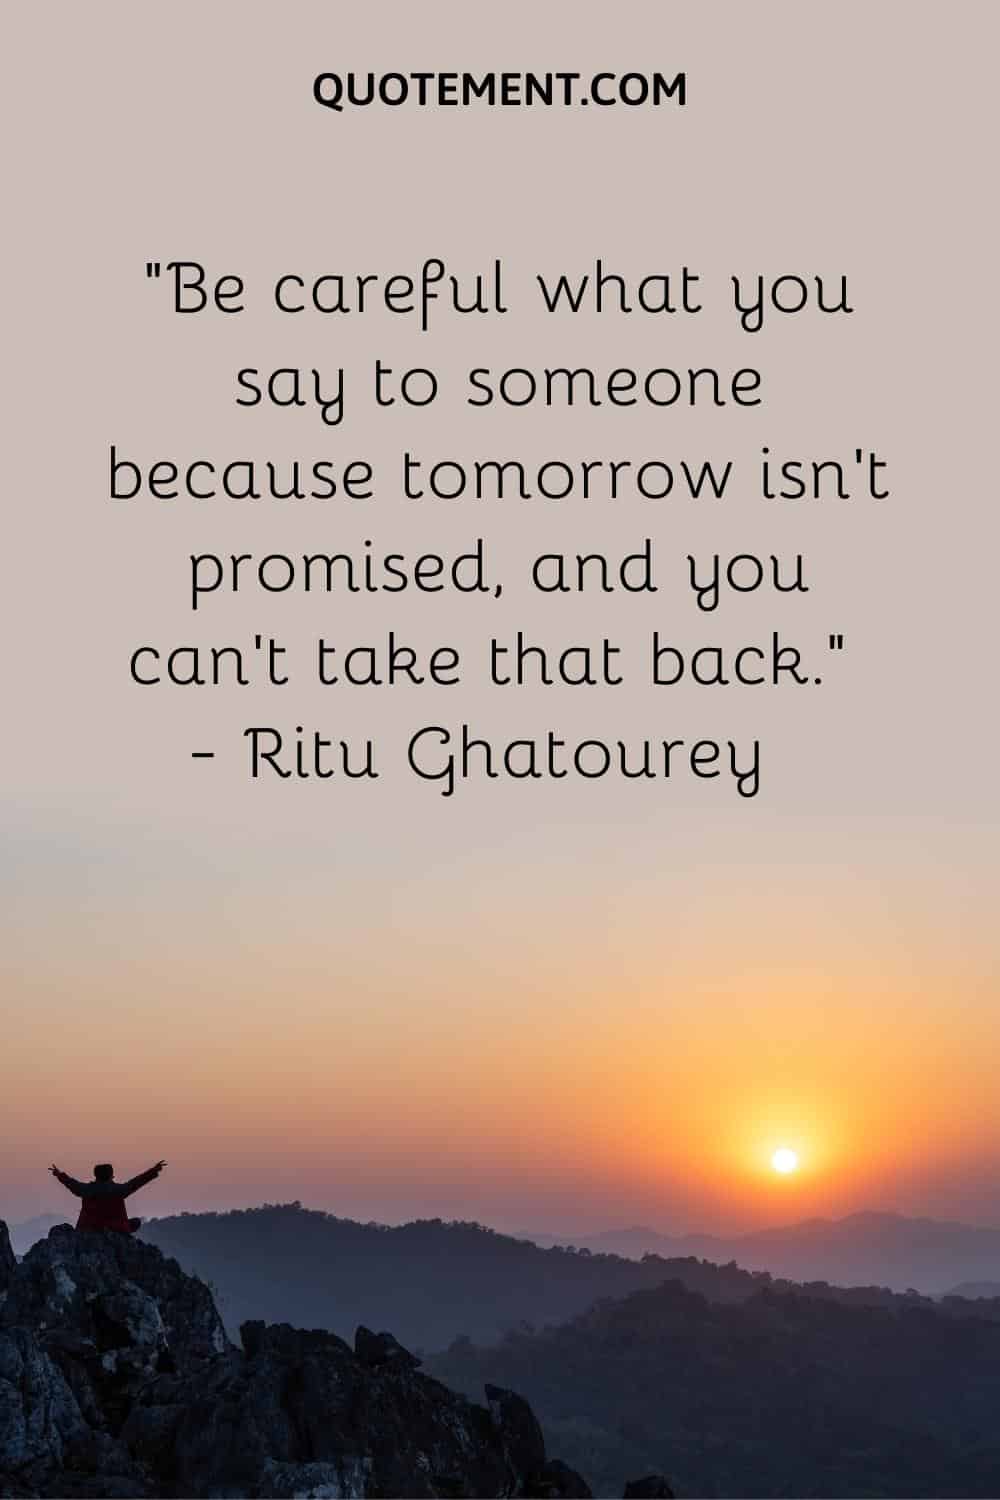 Be careful what you say to someone because tomorrow isn’t promised, and you can’t take that back